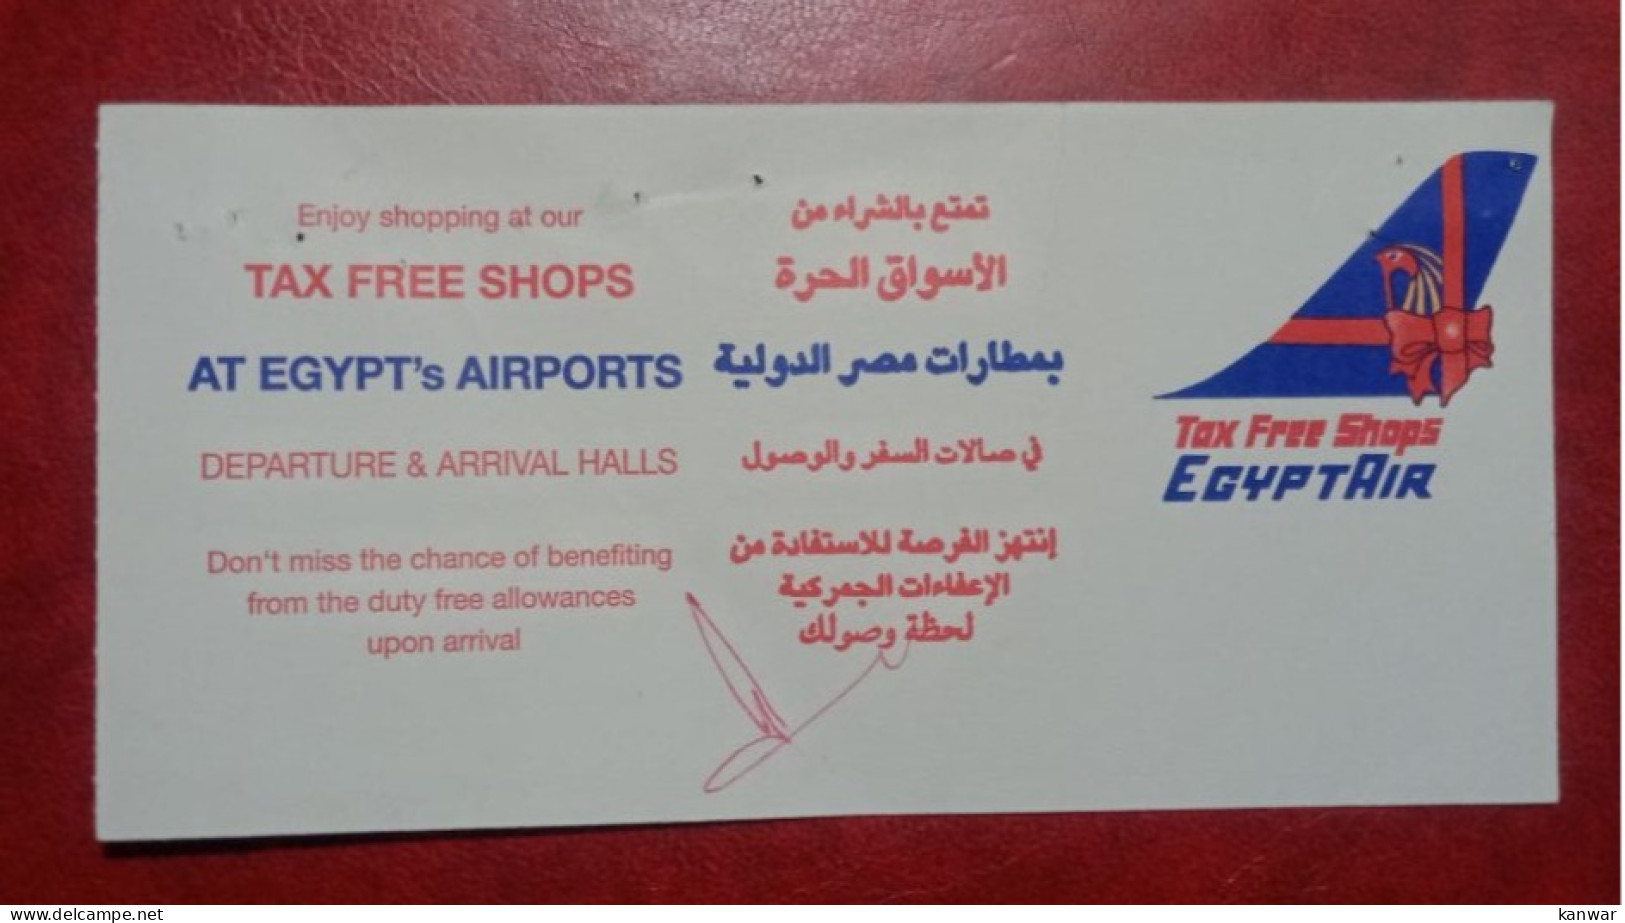 EGYPTAIR AIRLINES AIRWAYS ECONOMY CLASS BOARDING PASS - Boarding Passes